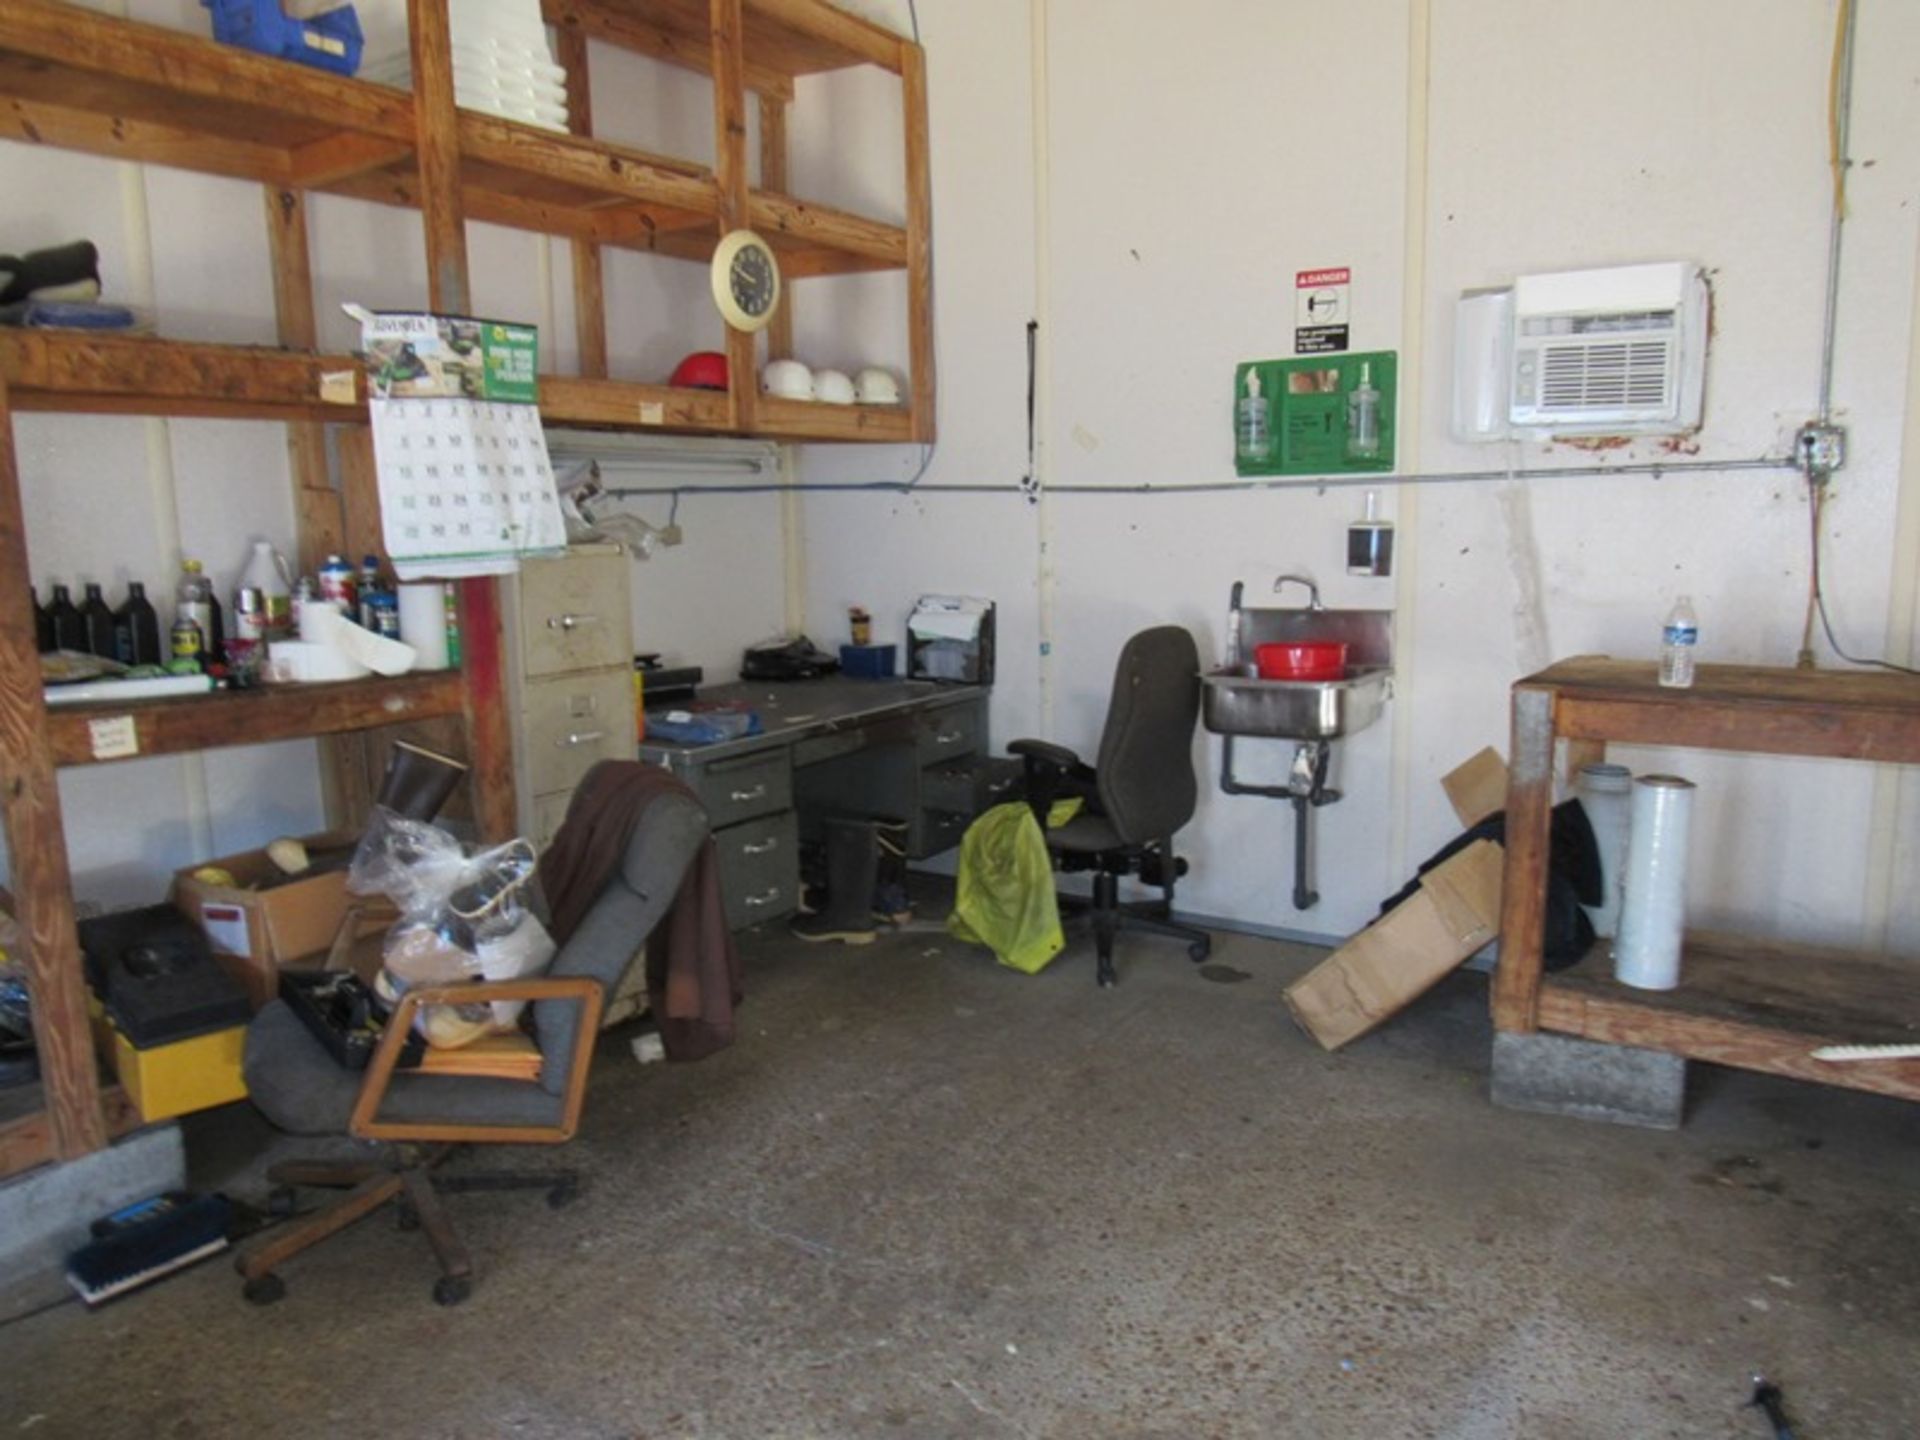 Lot Compressor Room Contents: Desk, Chairs, Hose, Sprayers, Bump Caps, Boots, Stainless Steel - Image 2 of 10